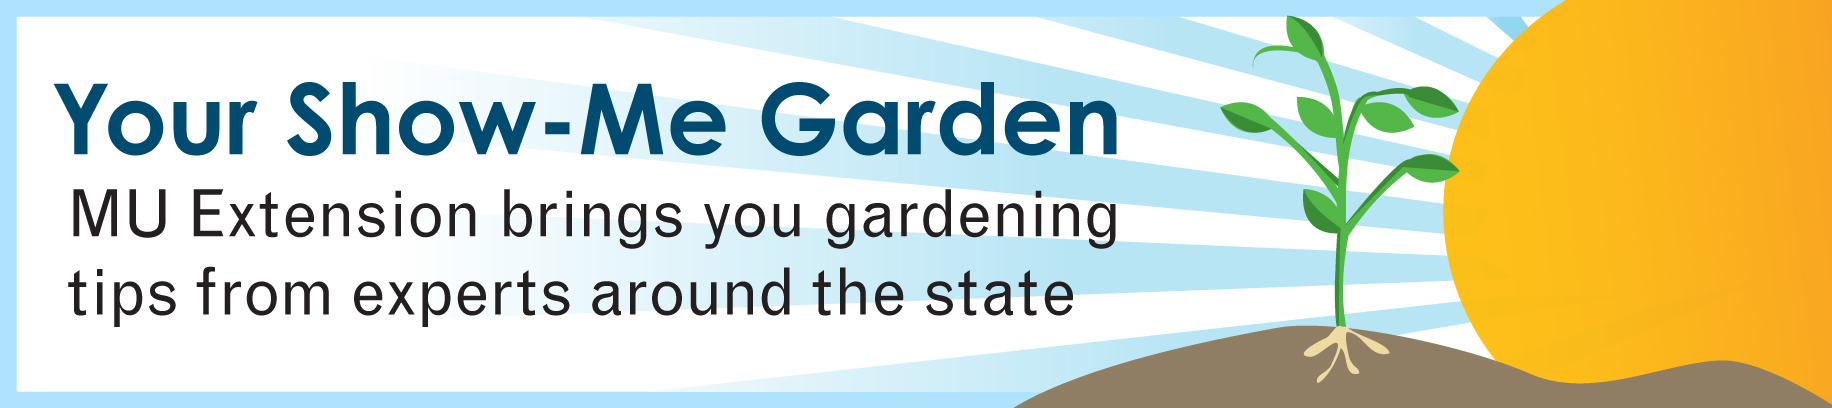 Your Show-Me Garden: MU Extension brings you gardening tips from experts around the state.